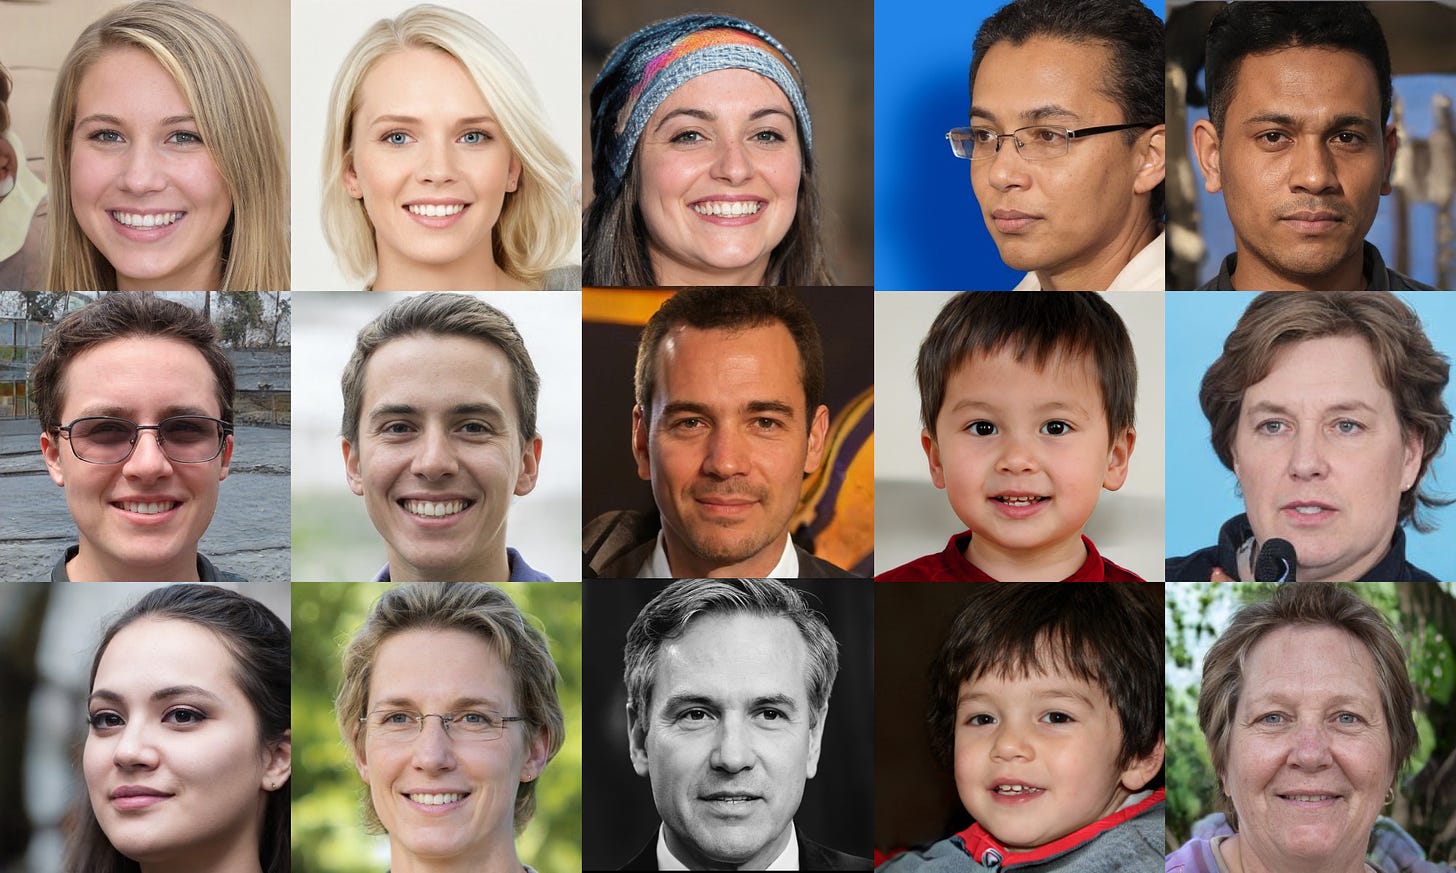 15 examples of GAN-generated faces